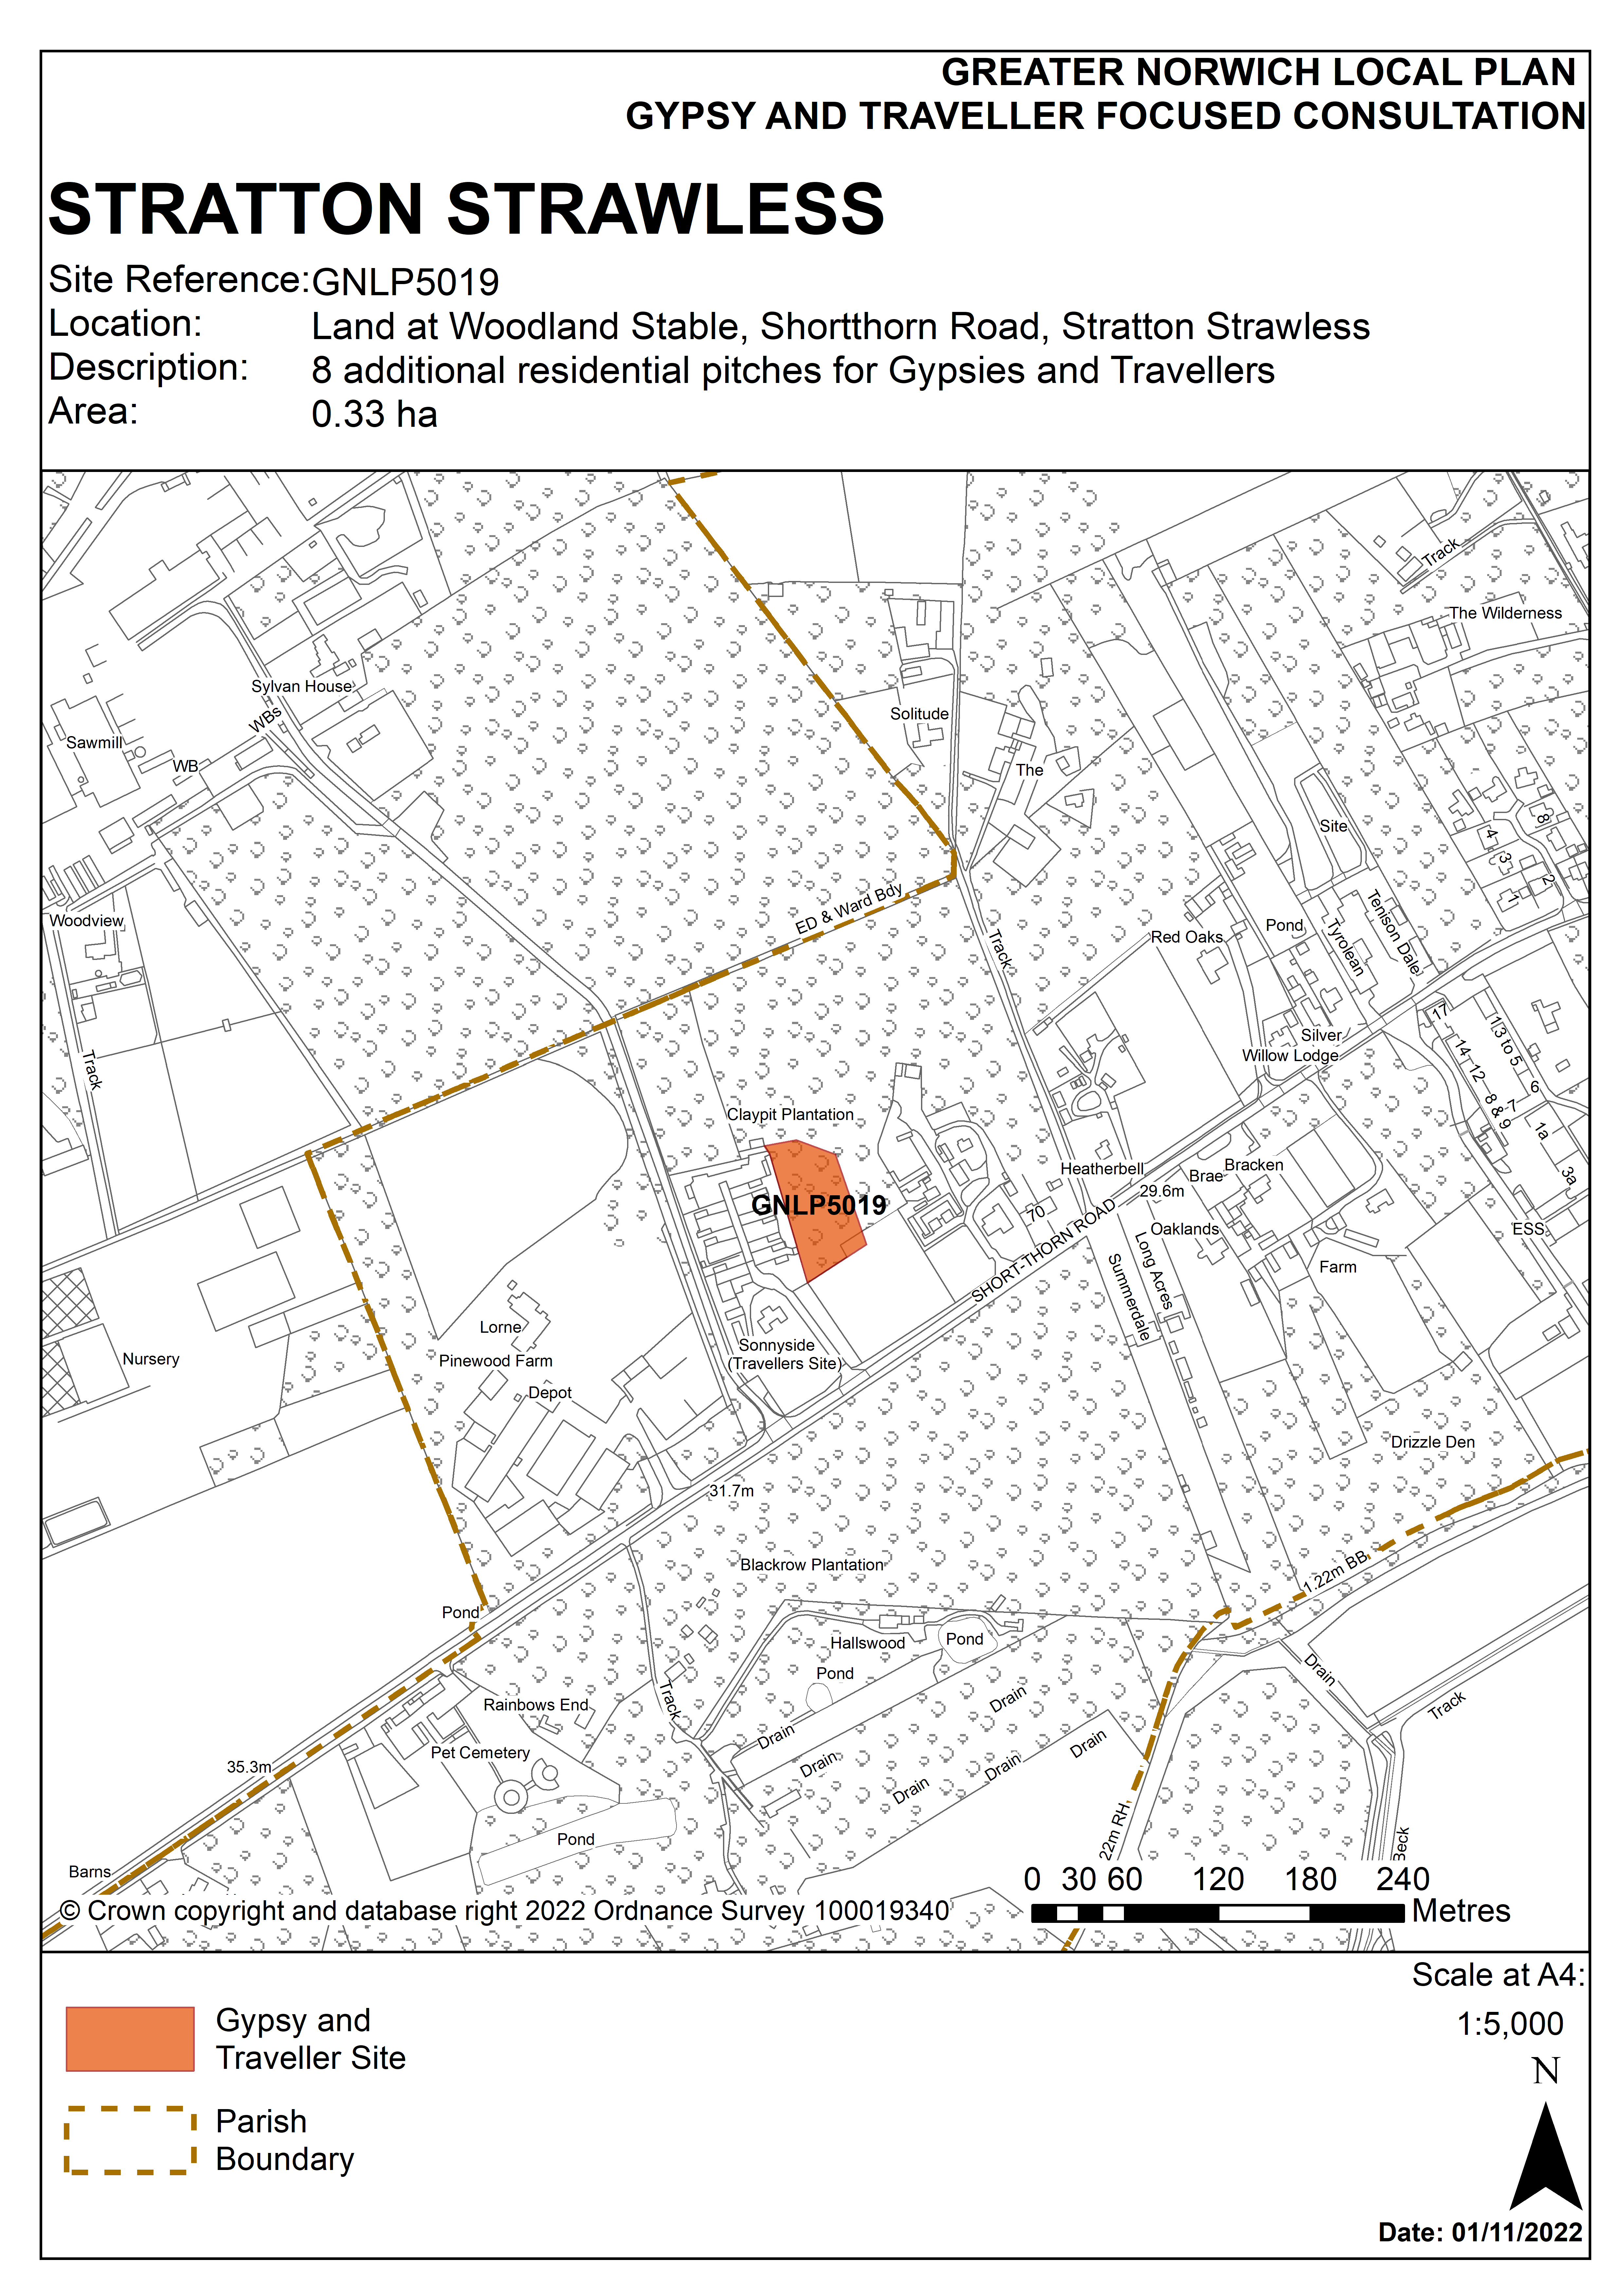 Map showing proposed Gypsy and Traveller site at Woodland Stable, Shortthorn Road, Stratton Strawless